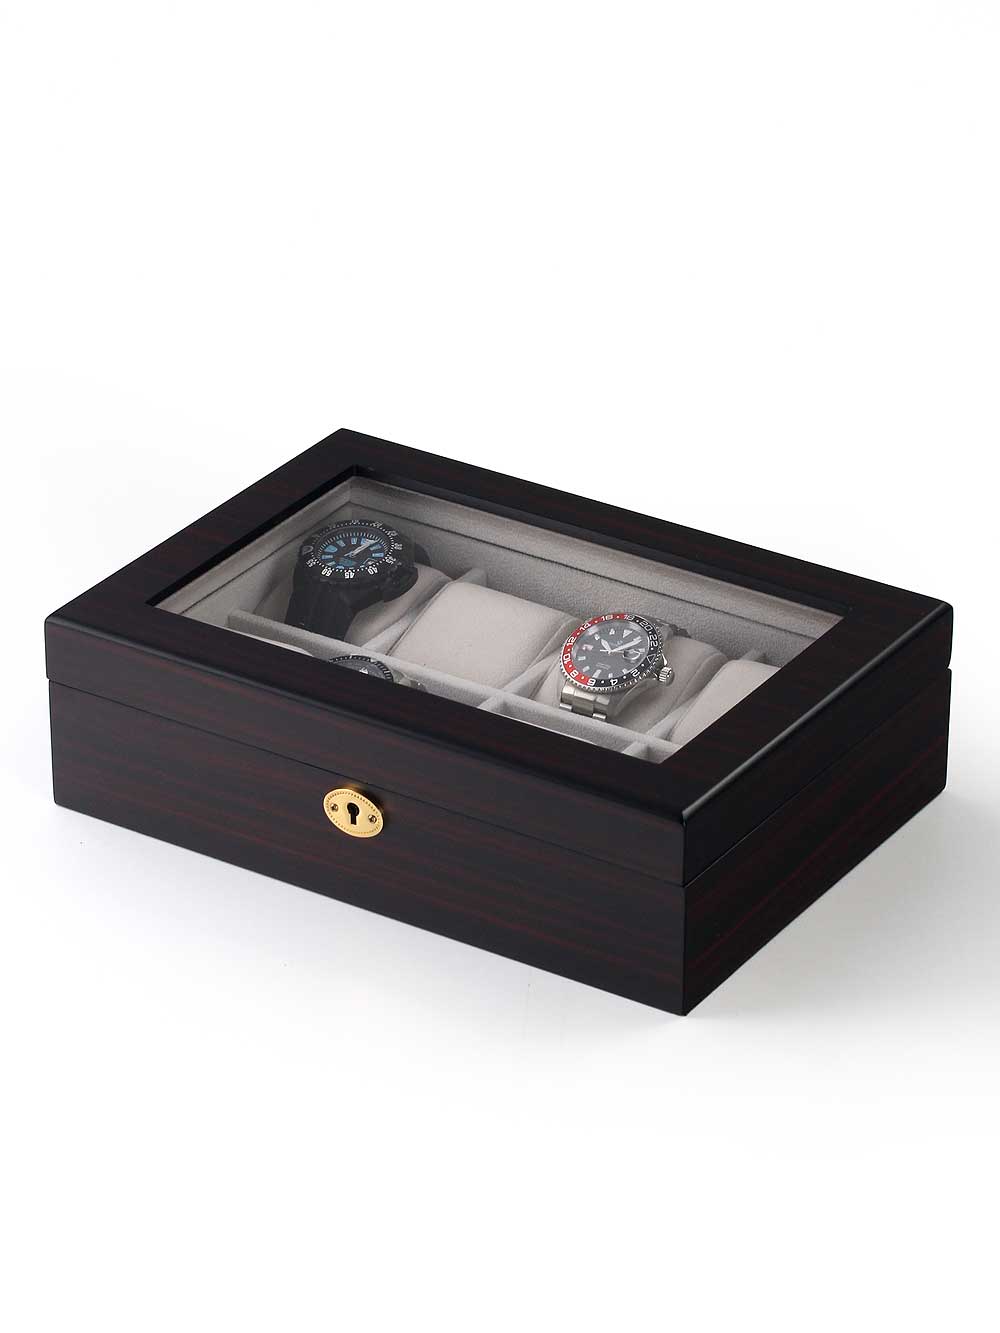 Rothschild watch box RS-2105-8E for 8 Watches Ebony